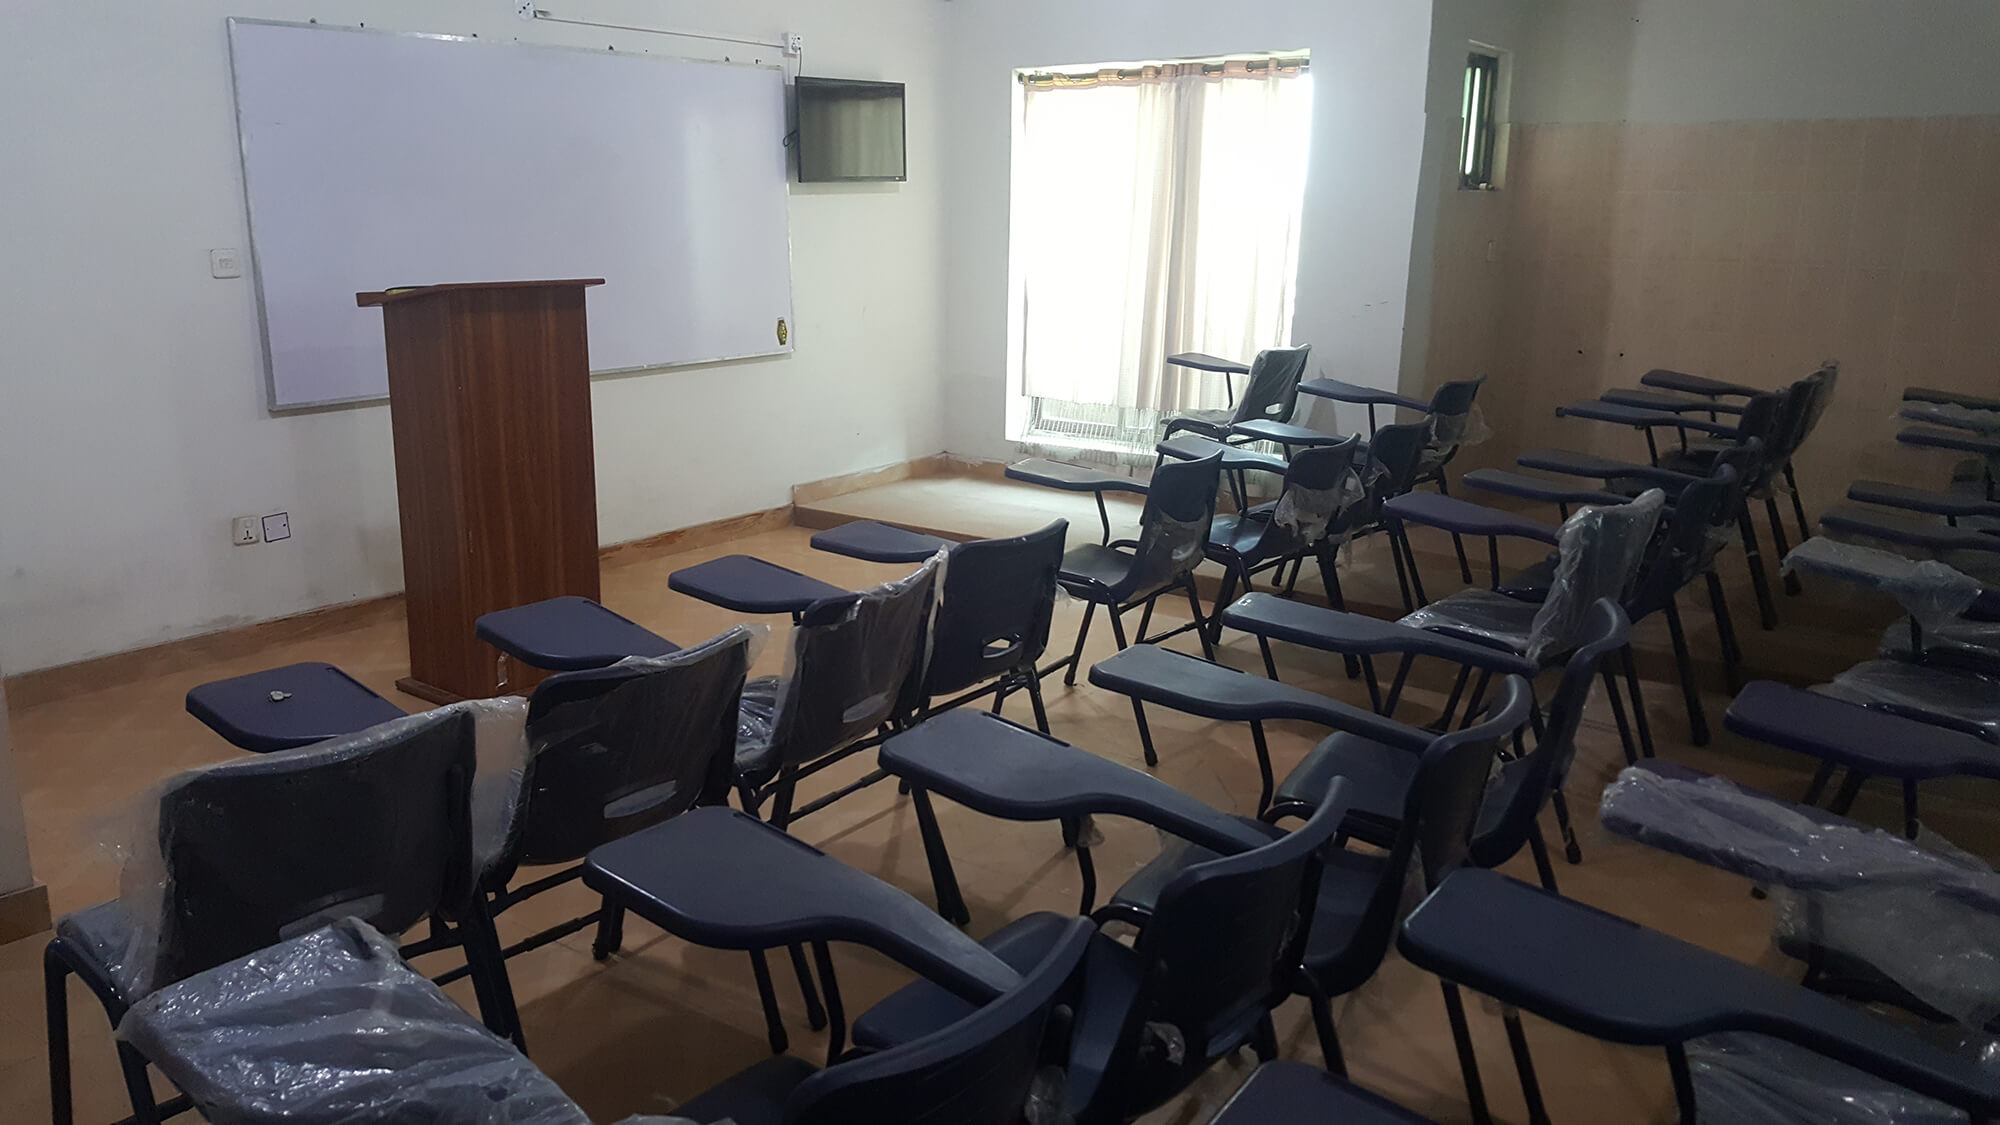 Lecture Halls 2